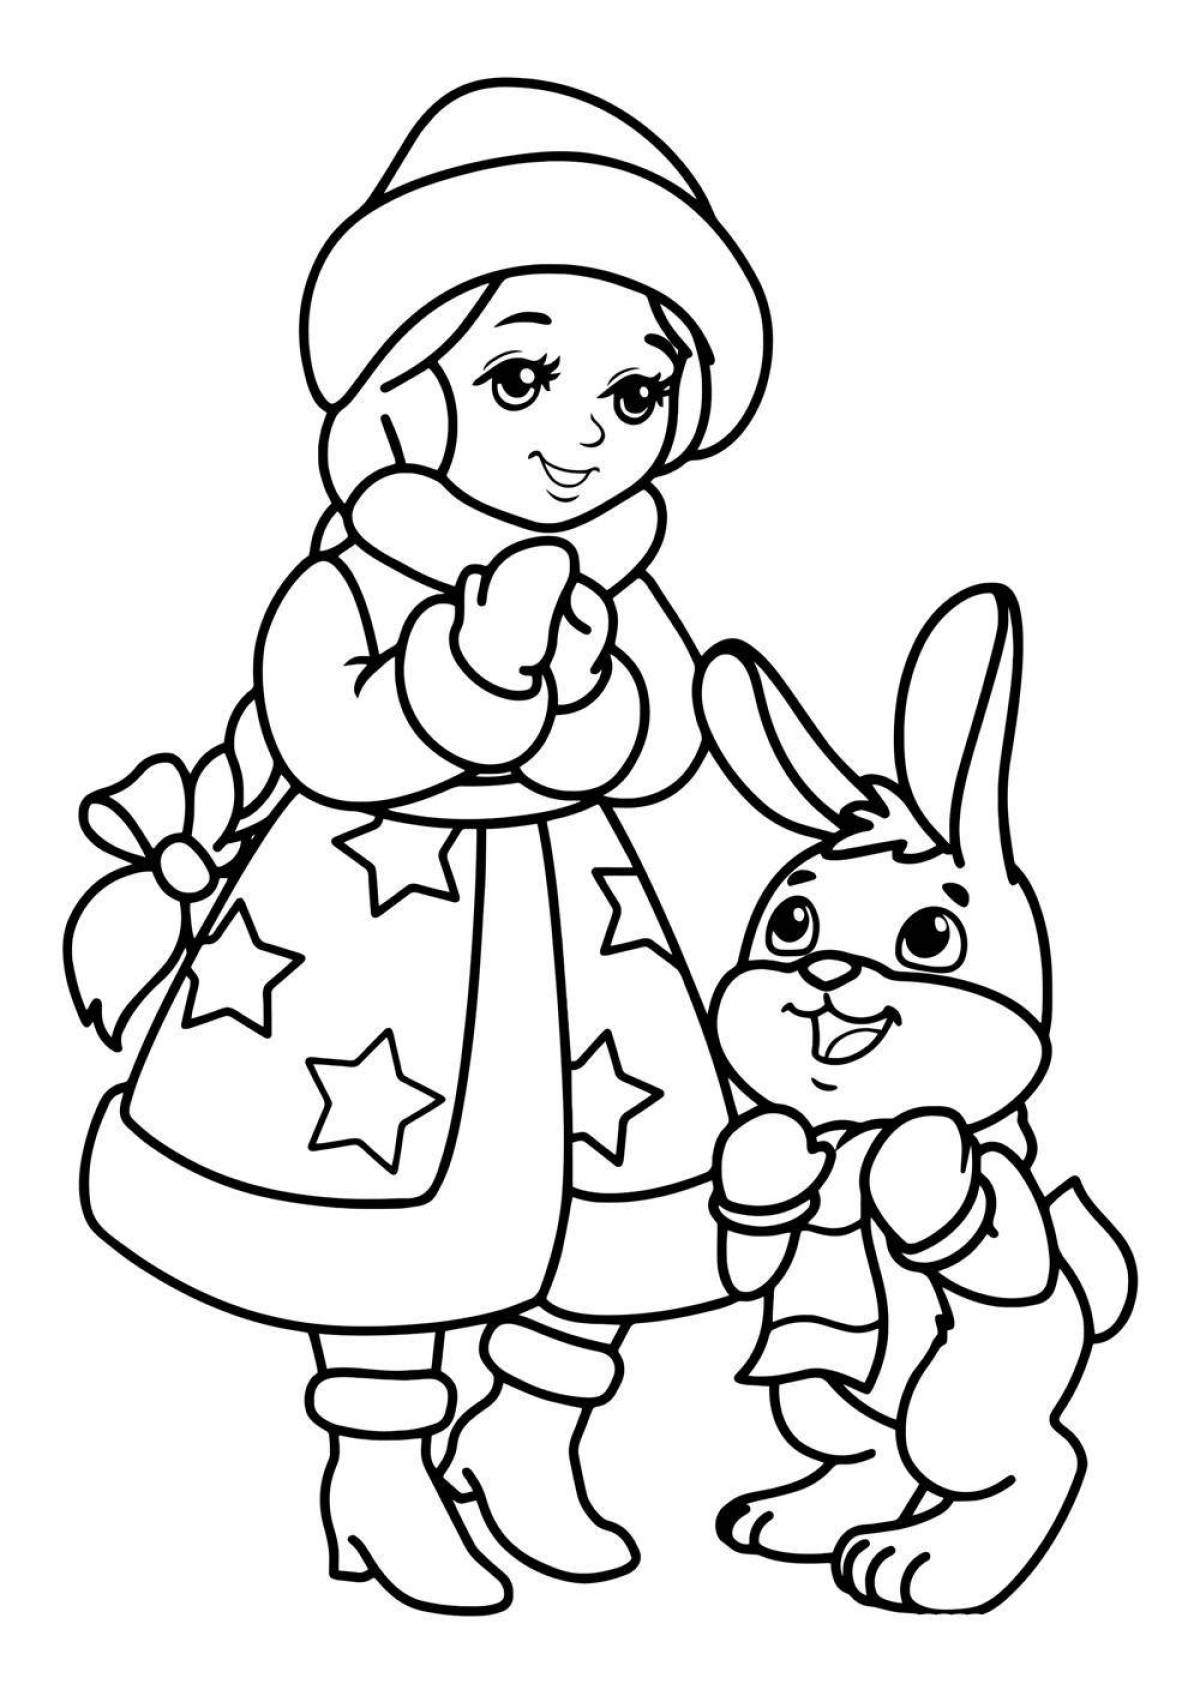 Blissful snow maiden coloring book